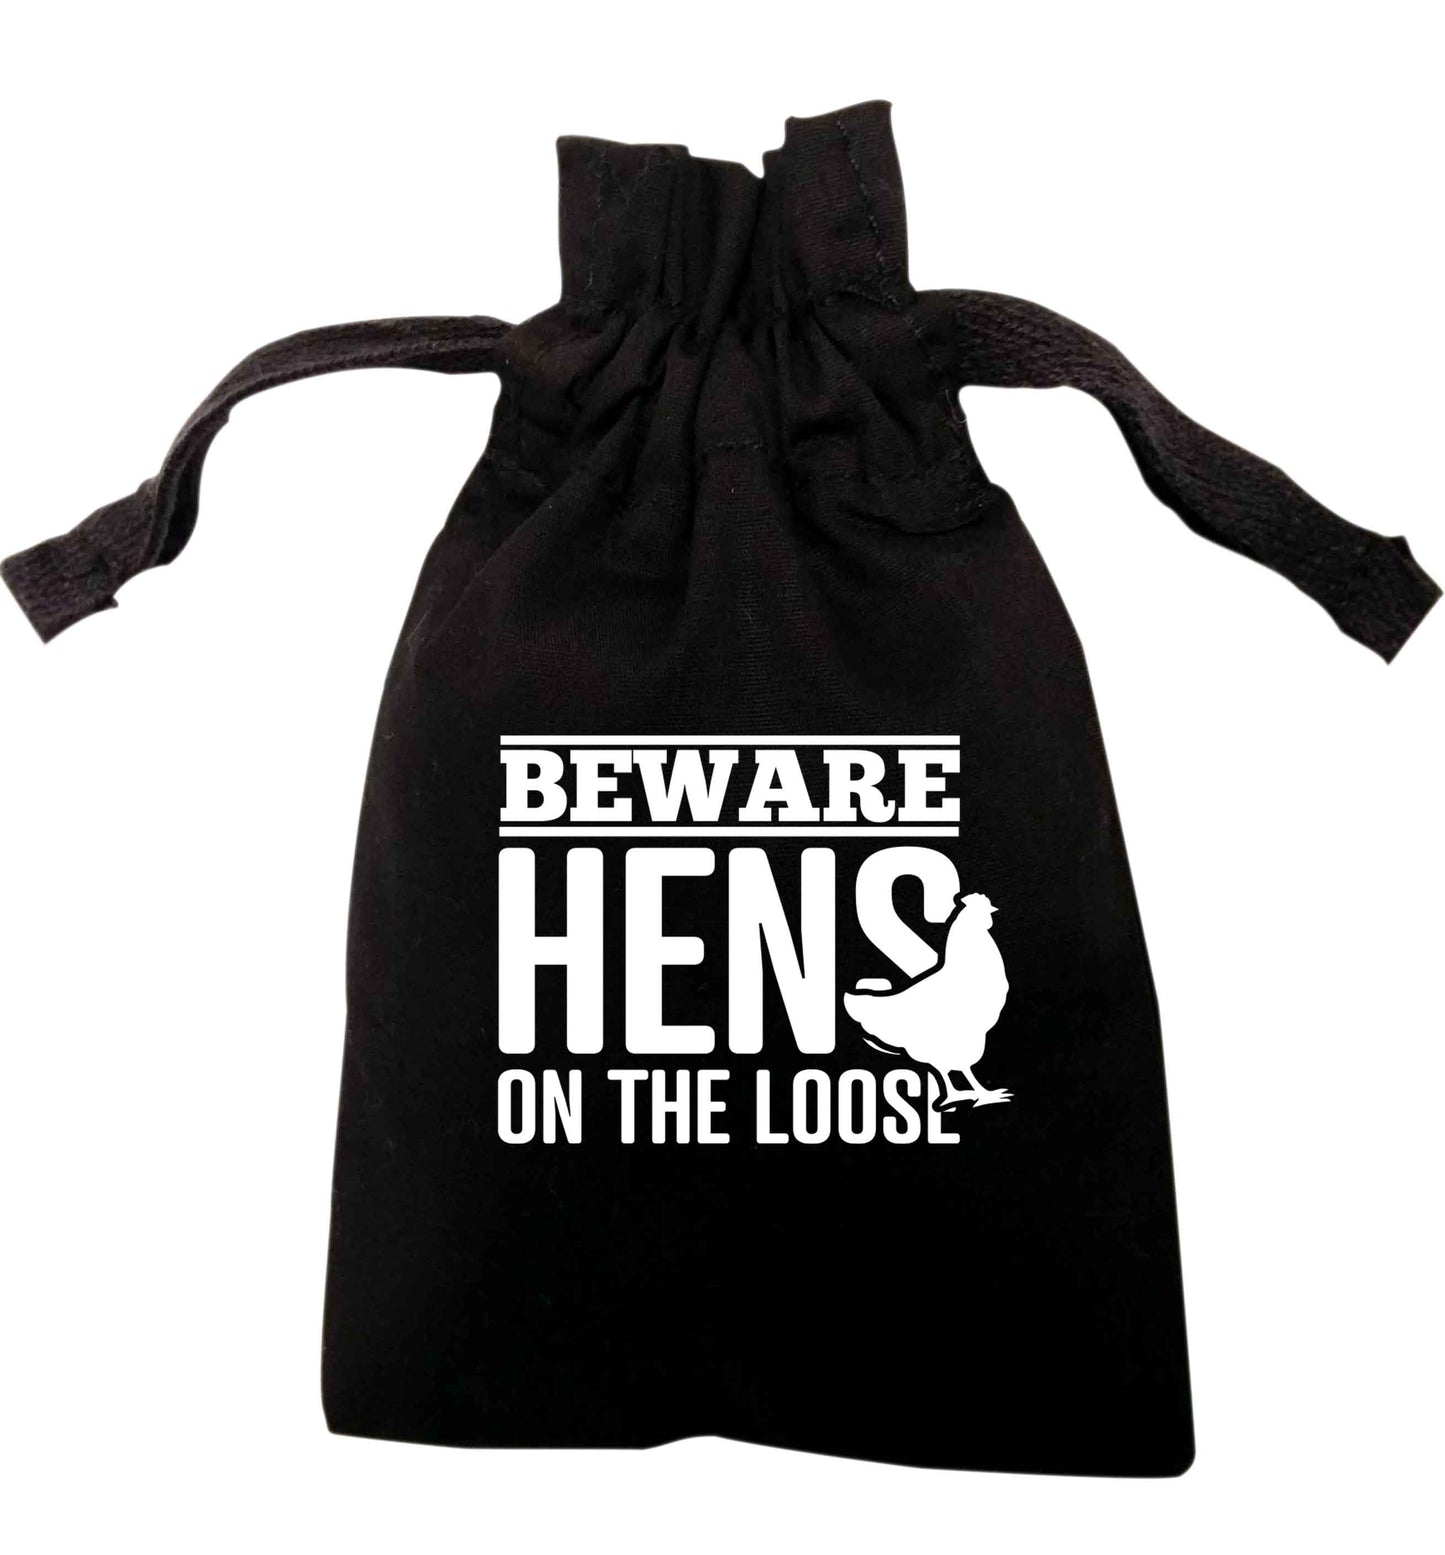 Beware hens on the loose | XS - L | Pouch / Drawstring bag / Sack | Organic Cotton | Bulk discounts available!